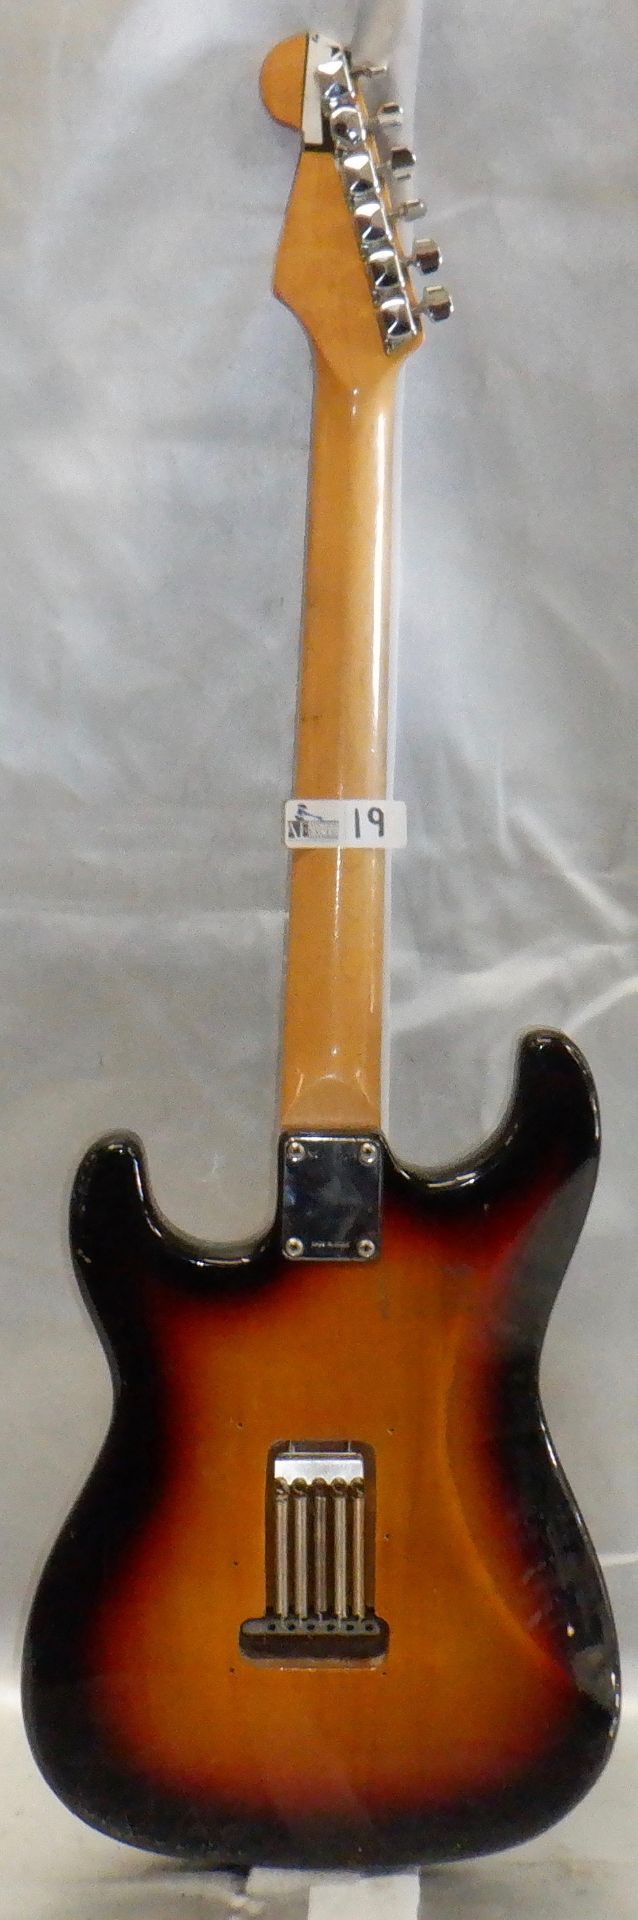 SQUIRE BY FENDER STRATOCASTER BULLET SERIES GUITAR WITH CASE - Image 5 of 6